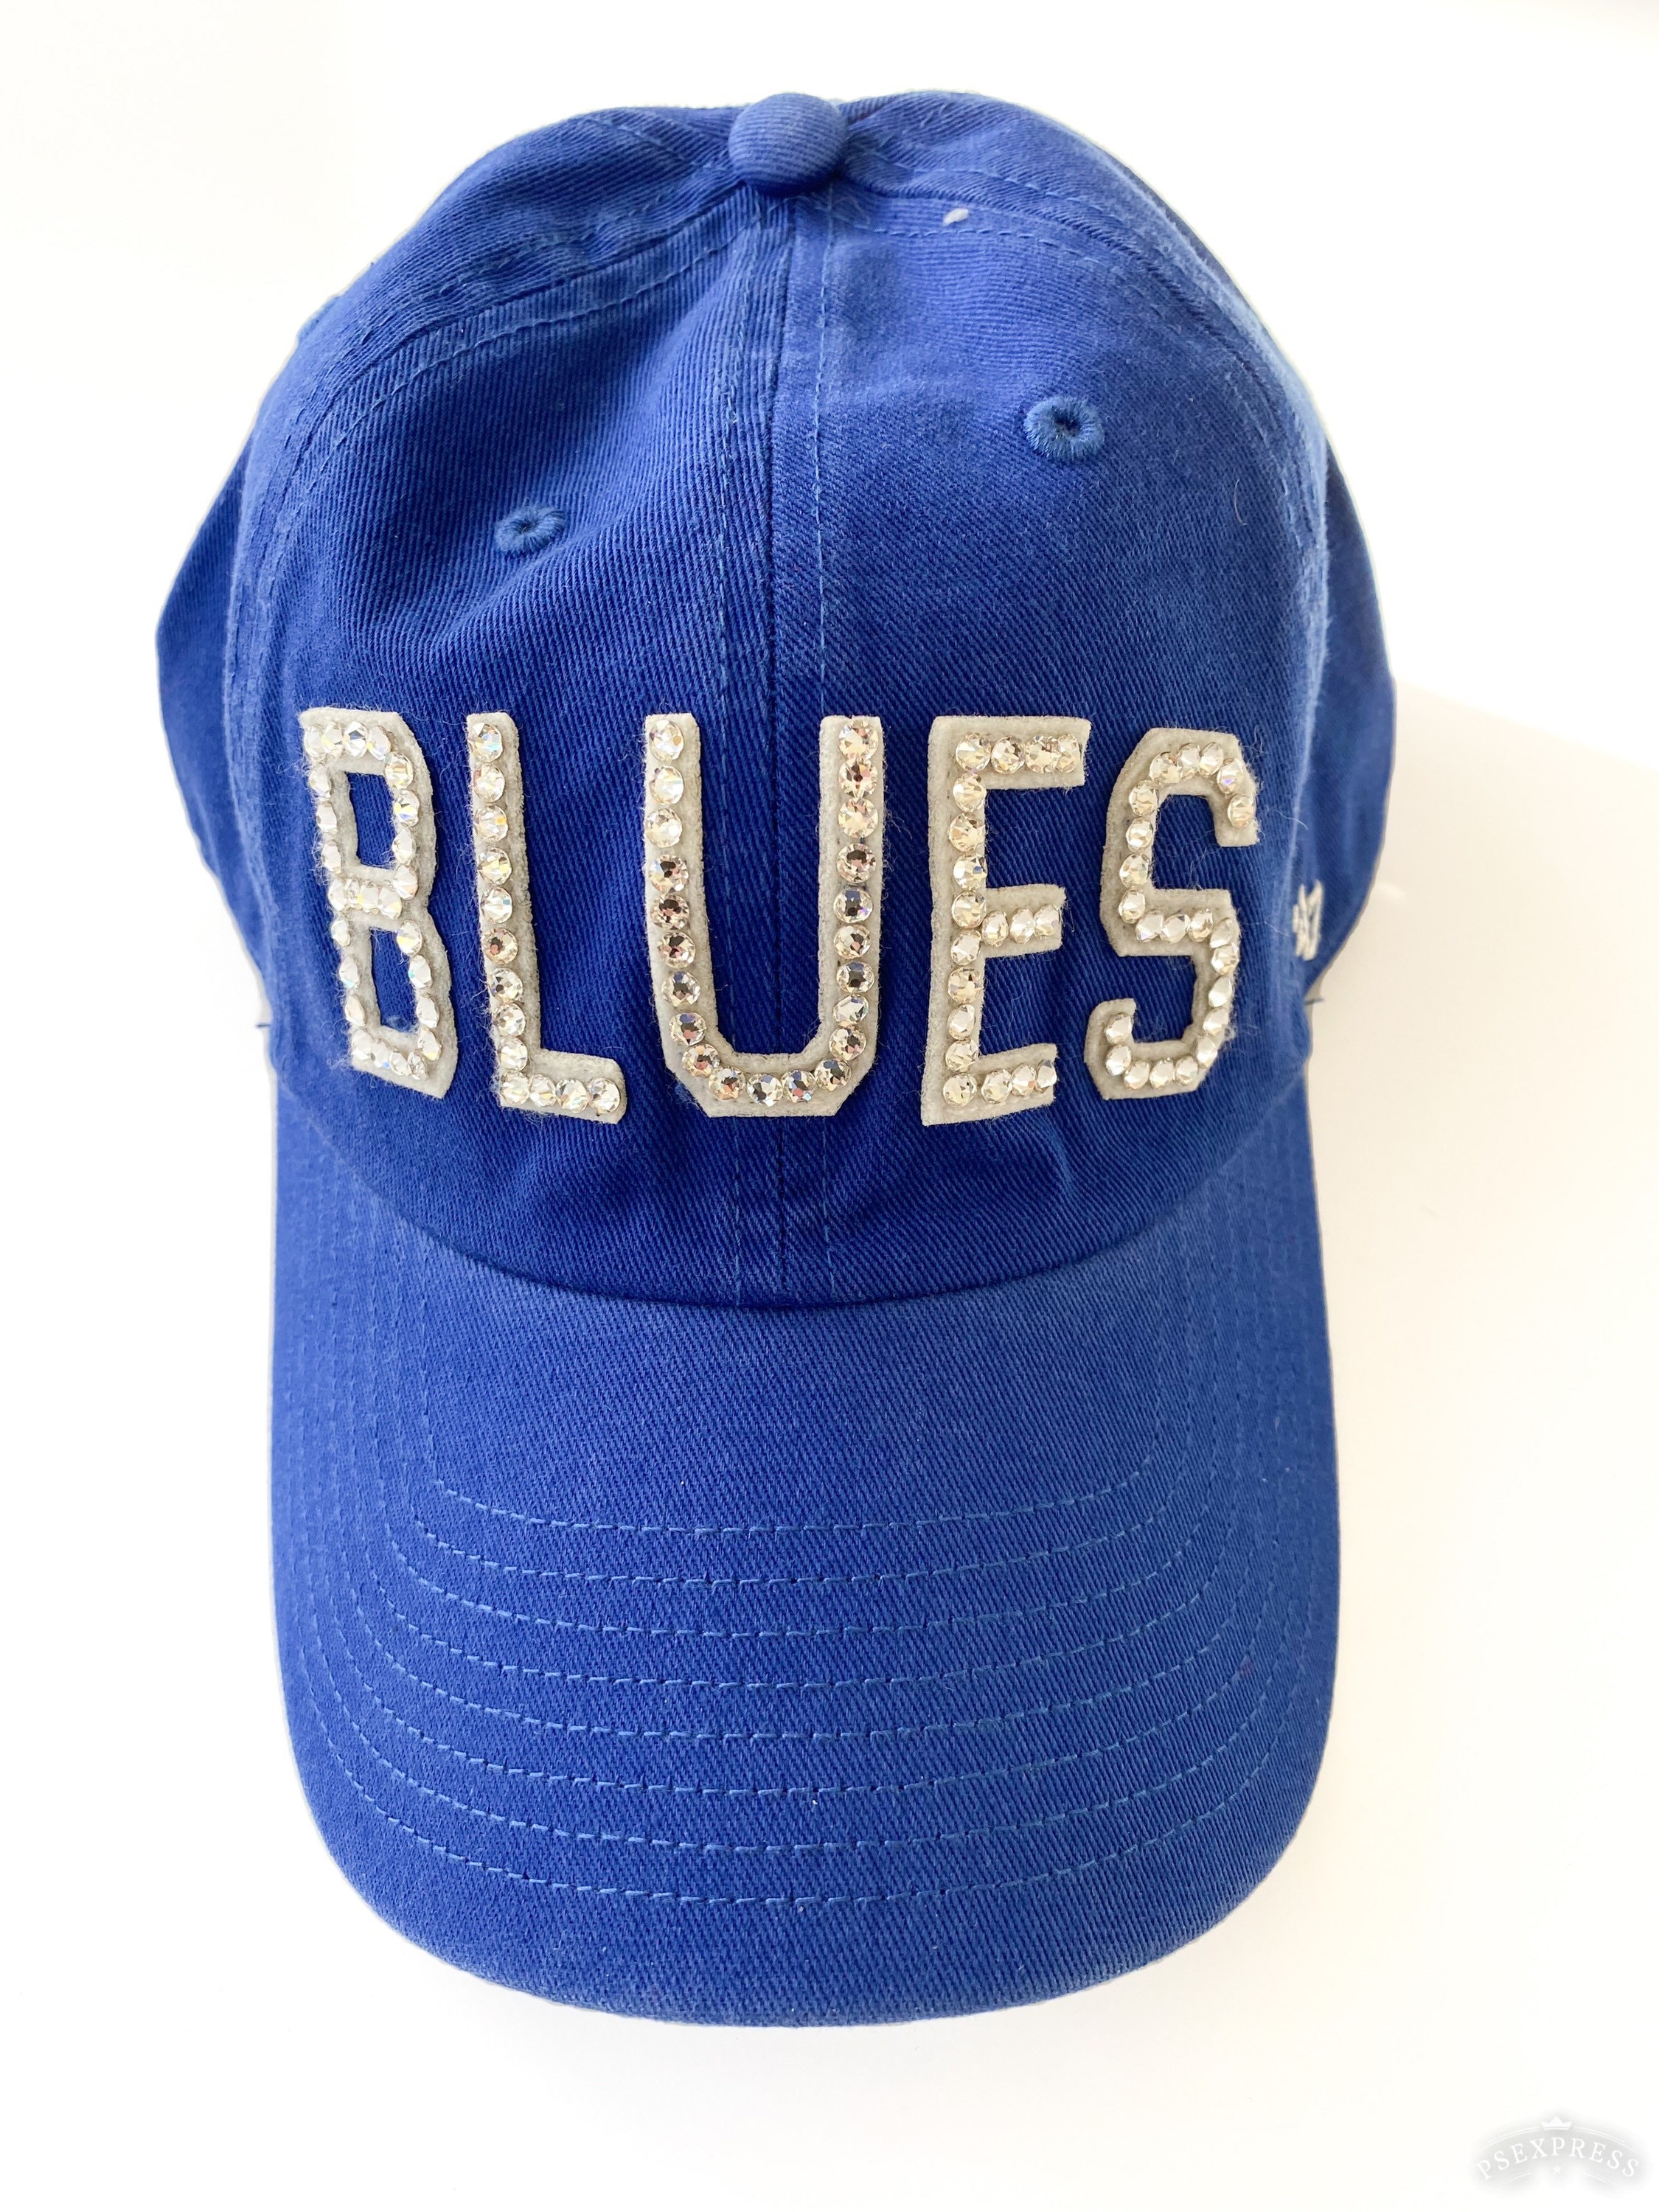 St. Louis Blues Hats  New, Preowned, and Vintage